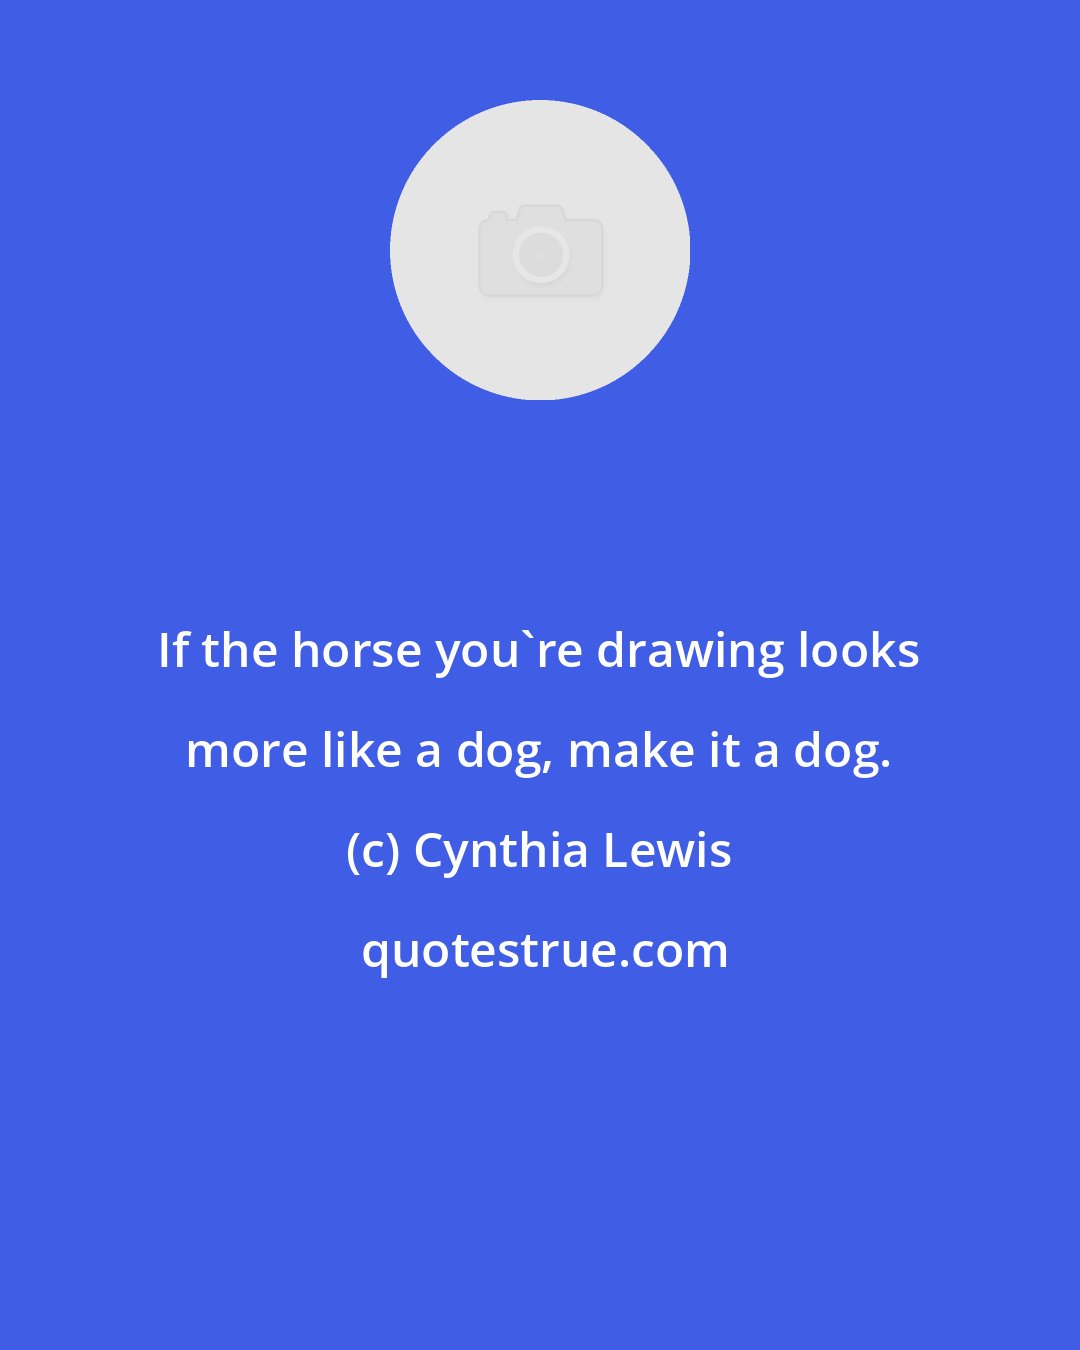 Cynthia Lewis: If the horse you're drawing looks more like a dog, make it a dog.